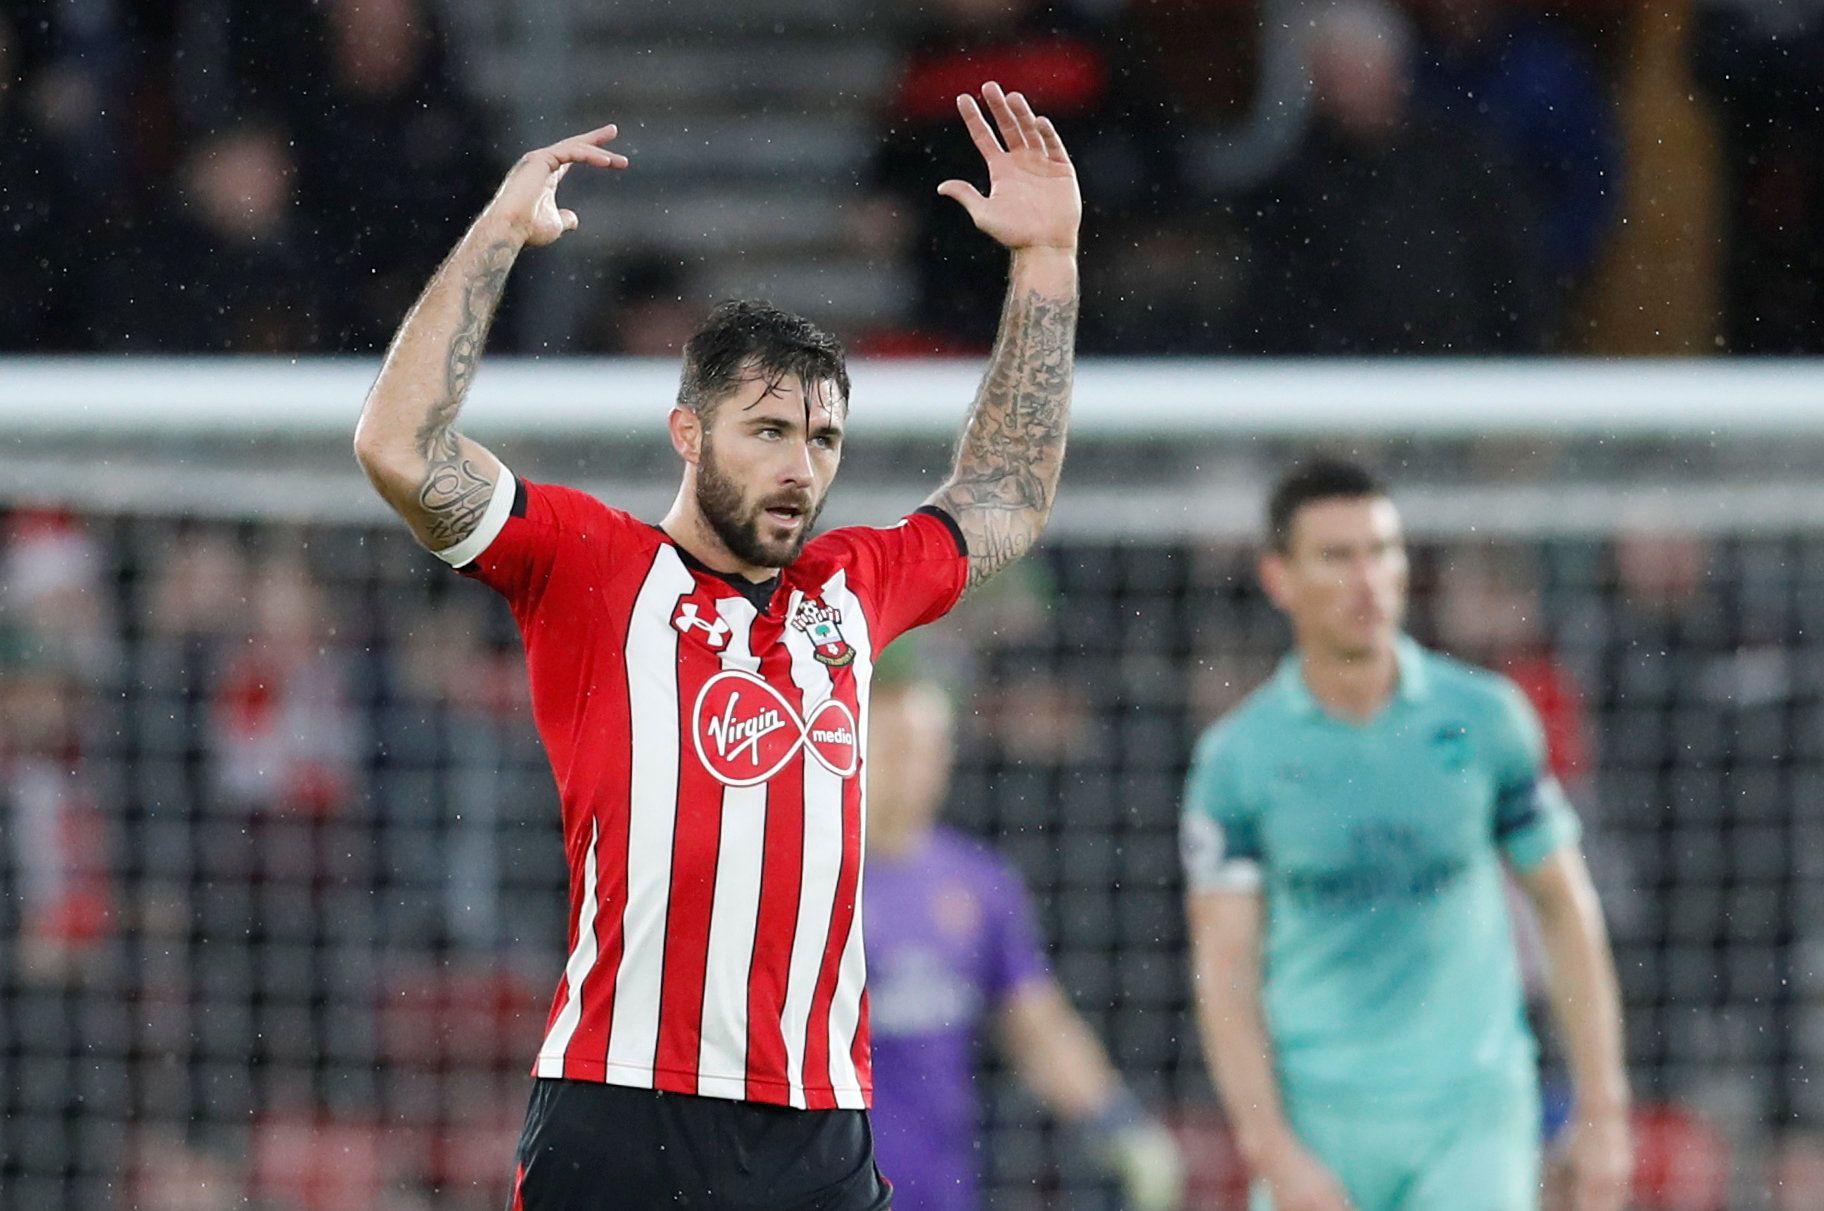 Soccer Football - Premier League - Southampton v Arsenal - St Mary's Stadium, Southampton, Britain - December 16, 2018  Southampton's Charlie Austin celebrates scoring their third goal   REUTERS/David Klein  EDITORIAL USE ONLY. No use with unauthorized audio, video, data, fixture lists, club/league logos or 